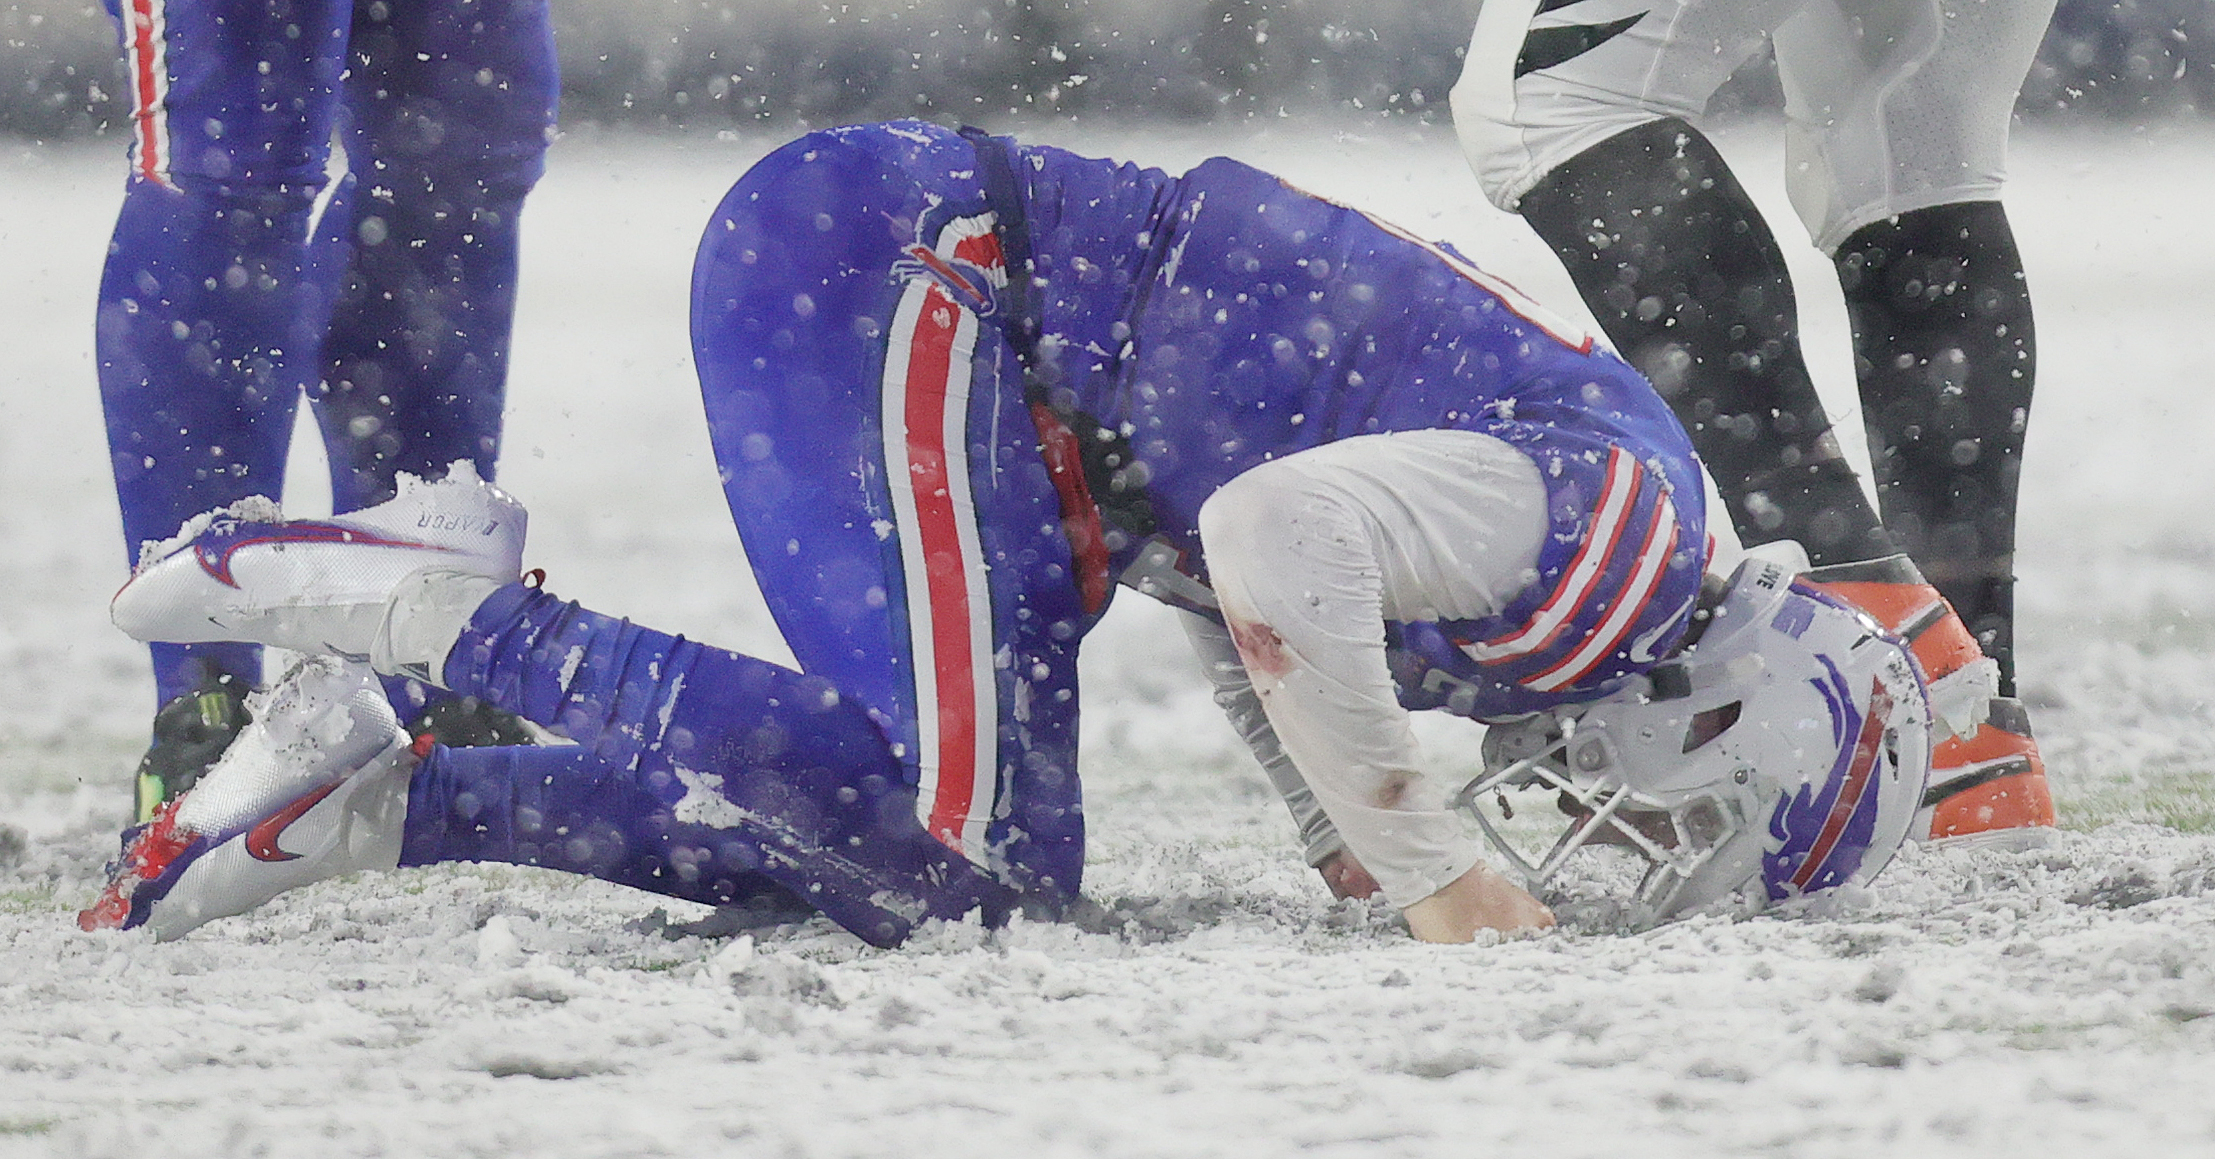 NFL playoffs: Joe Burrow, Bengals plow past Bills in snowy AFC divisional  game